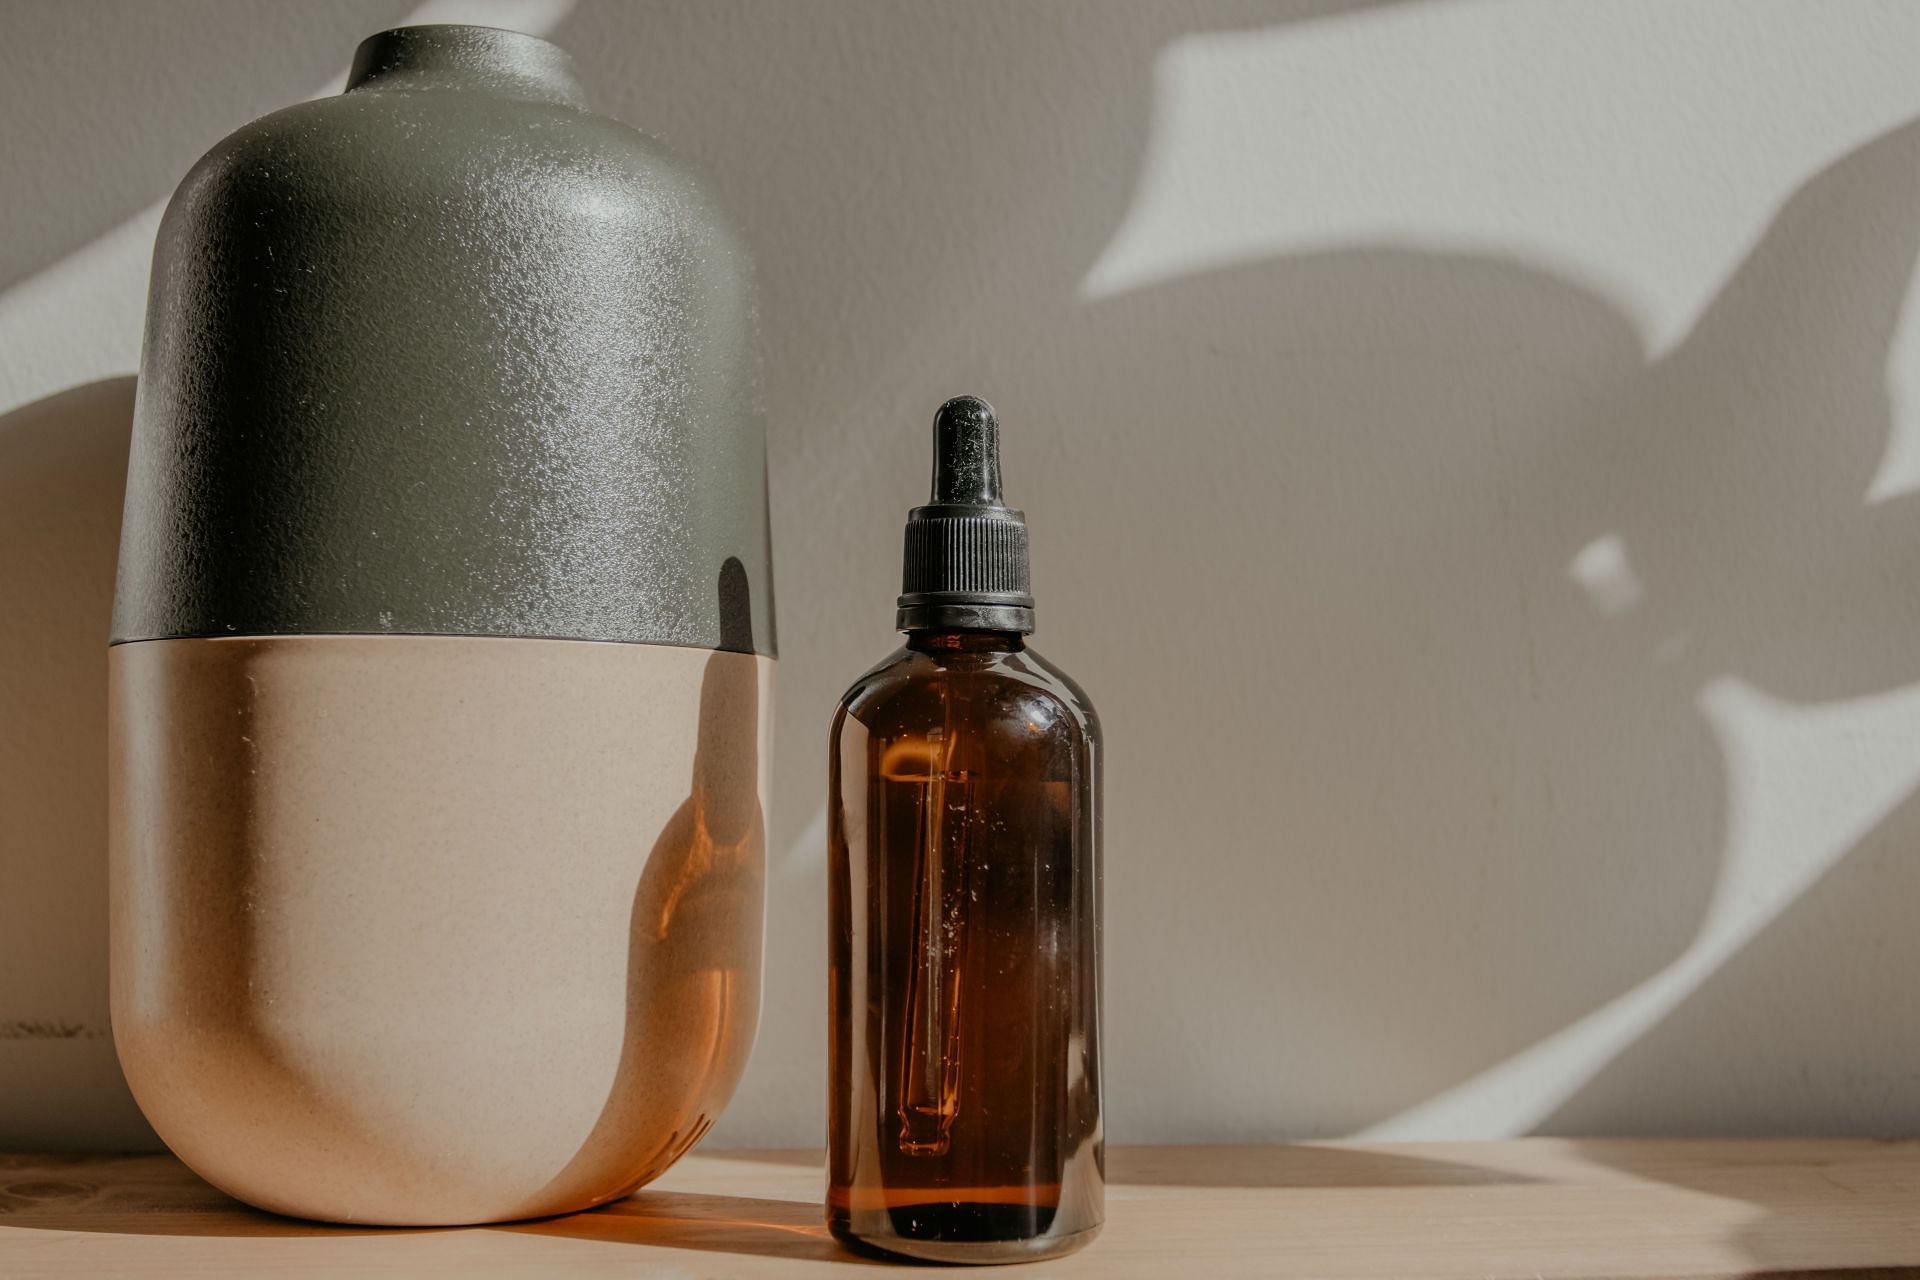 This oil promotes hair growth, moisturizes the scalp, reduces dandruff and dryness, and improves hair texture and shine (Image via Pexels)